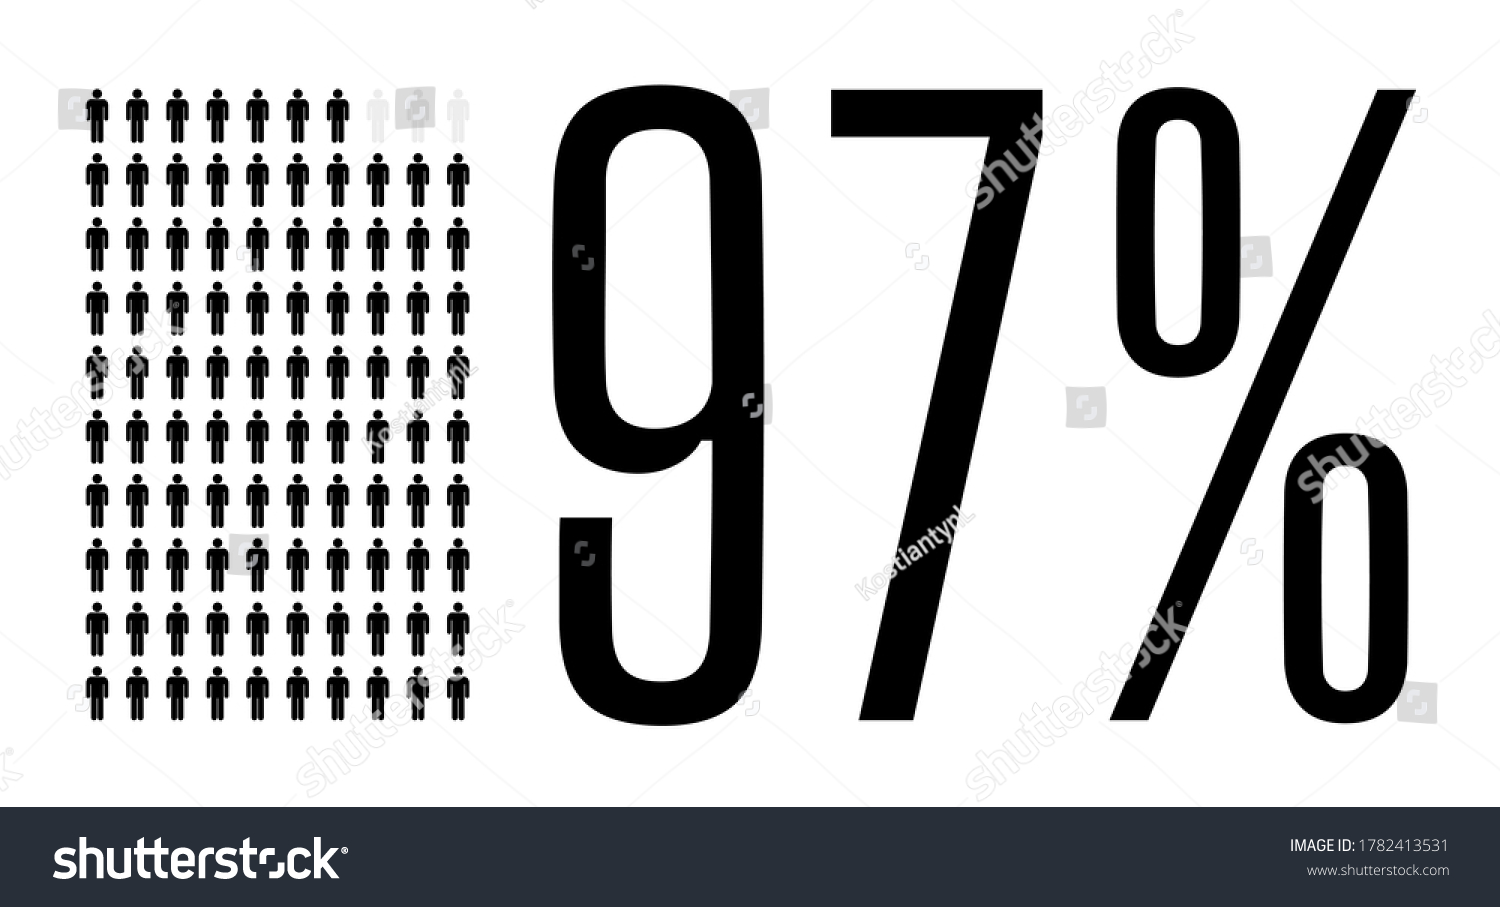 SVG of Ninety seven percent people graphic, 97 percentage population demography diagram. Vector people icon chart design for web ui design. Flat vector illustration black and grey on white background. svg